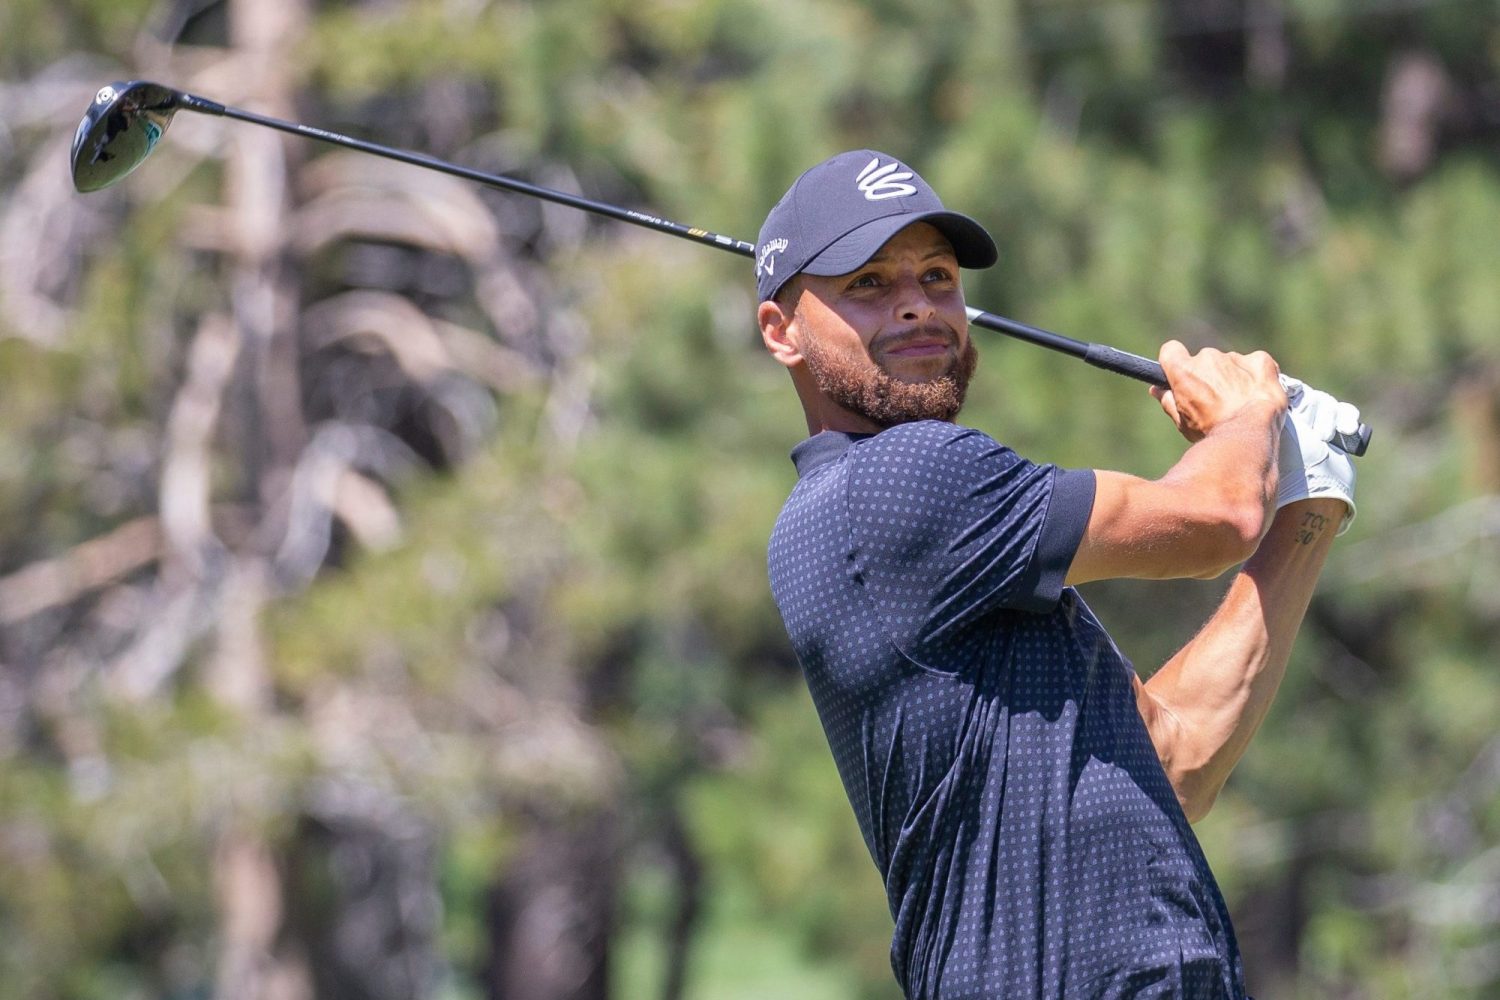 Stephen Curry hits atee shot on the 18th hole during the final round of the American Century Celebrity Championship golf tournament at Edgewood Tahoe Golf Course in Stateline, Nevada.